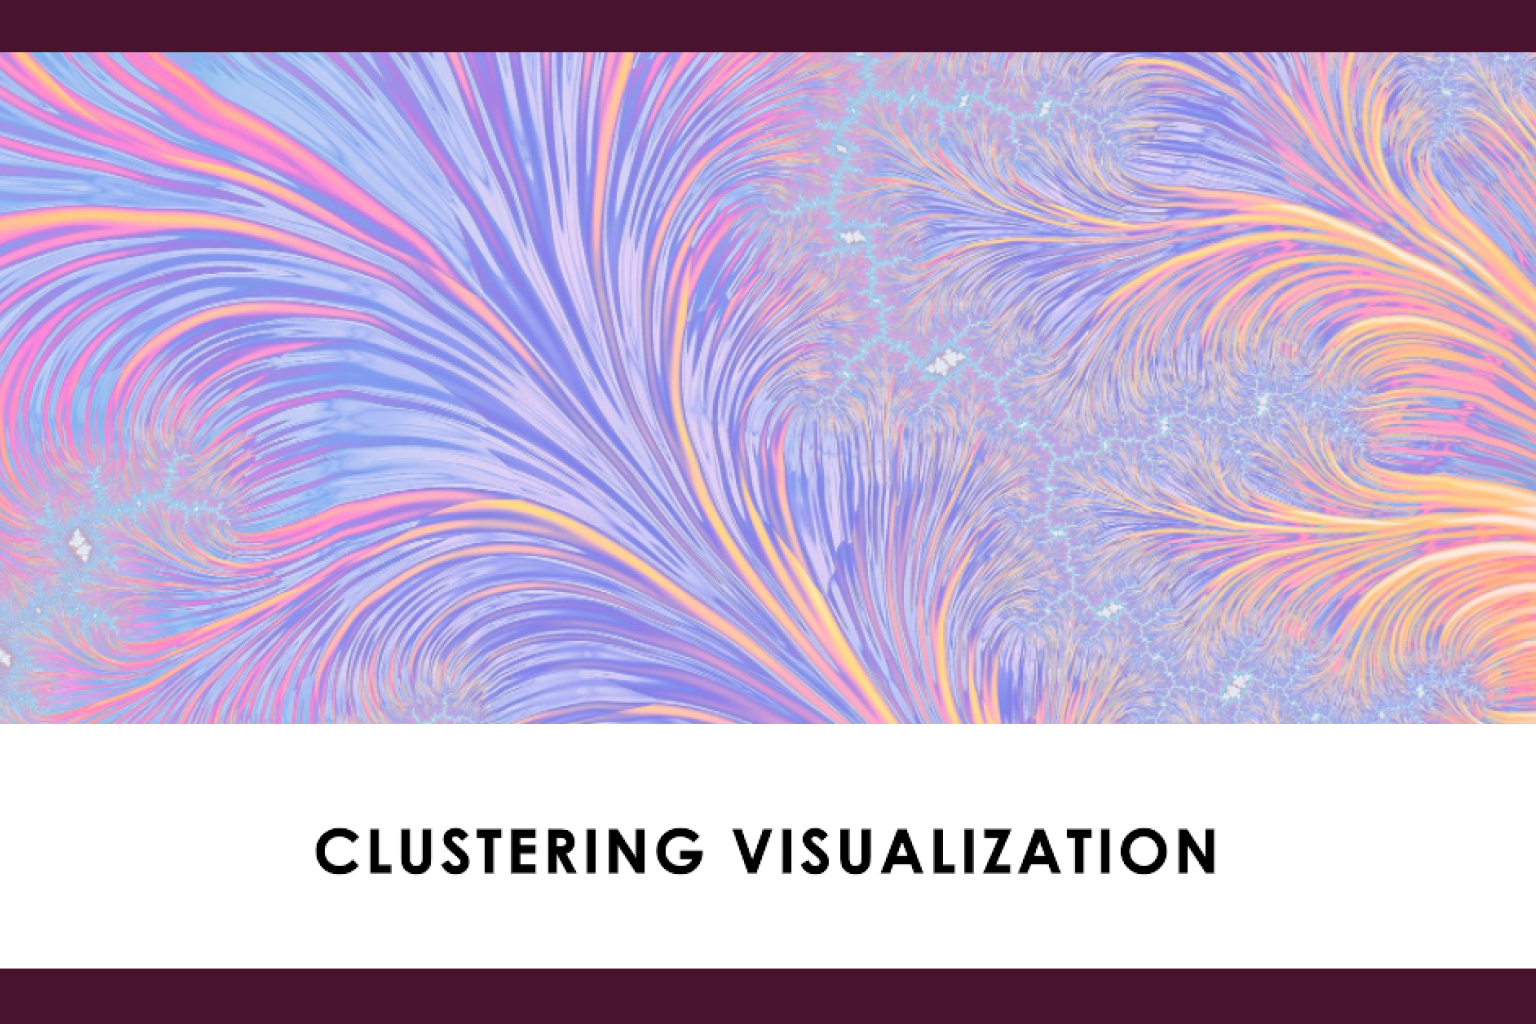 Discover the benefits of clustering visualization and how to implement it in your analysis with our comprehensive guide. Learn more now.